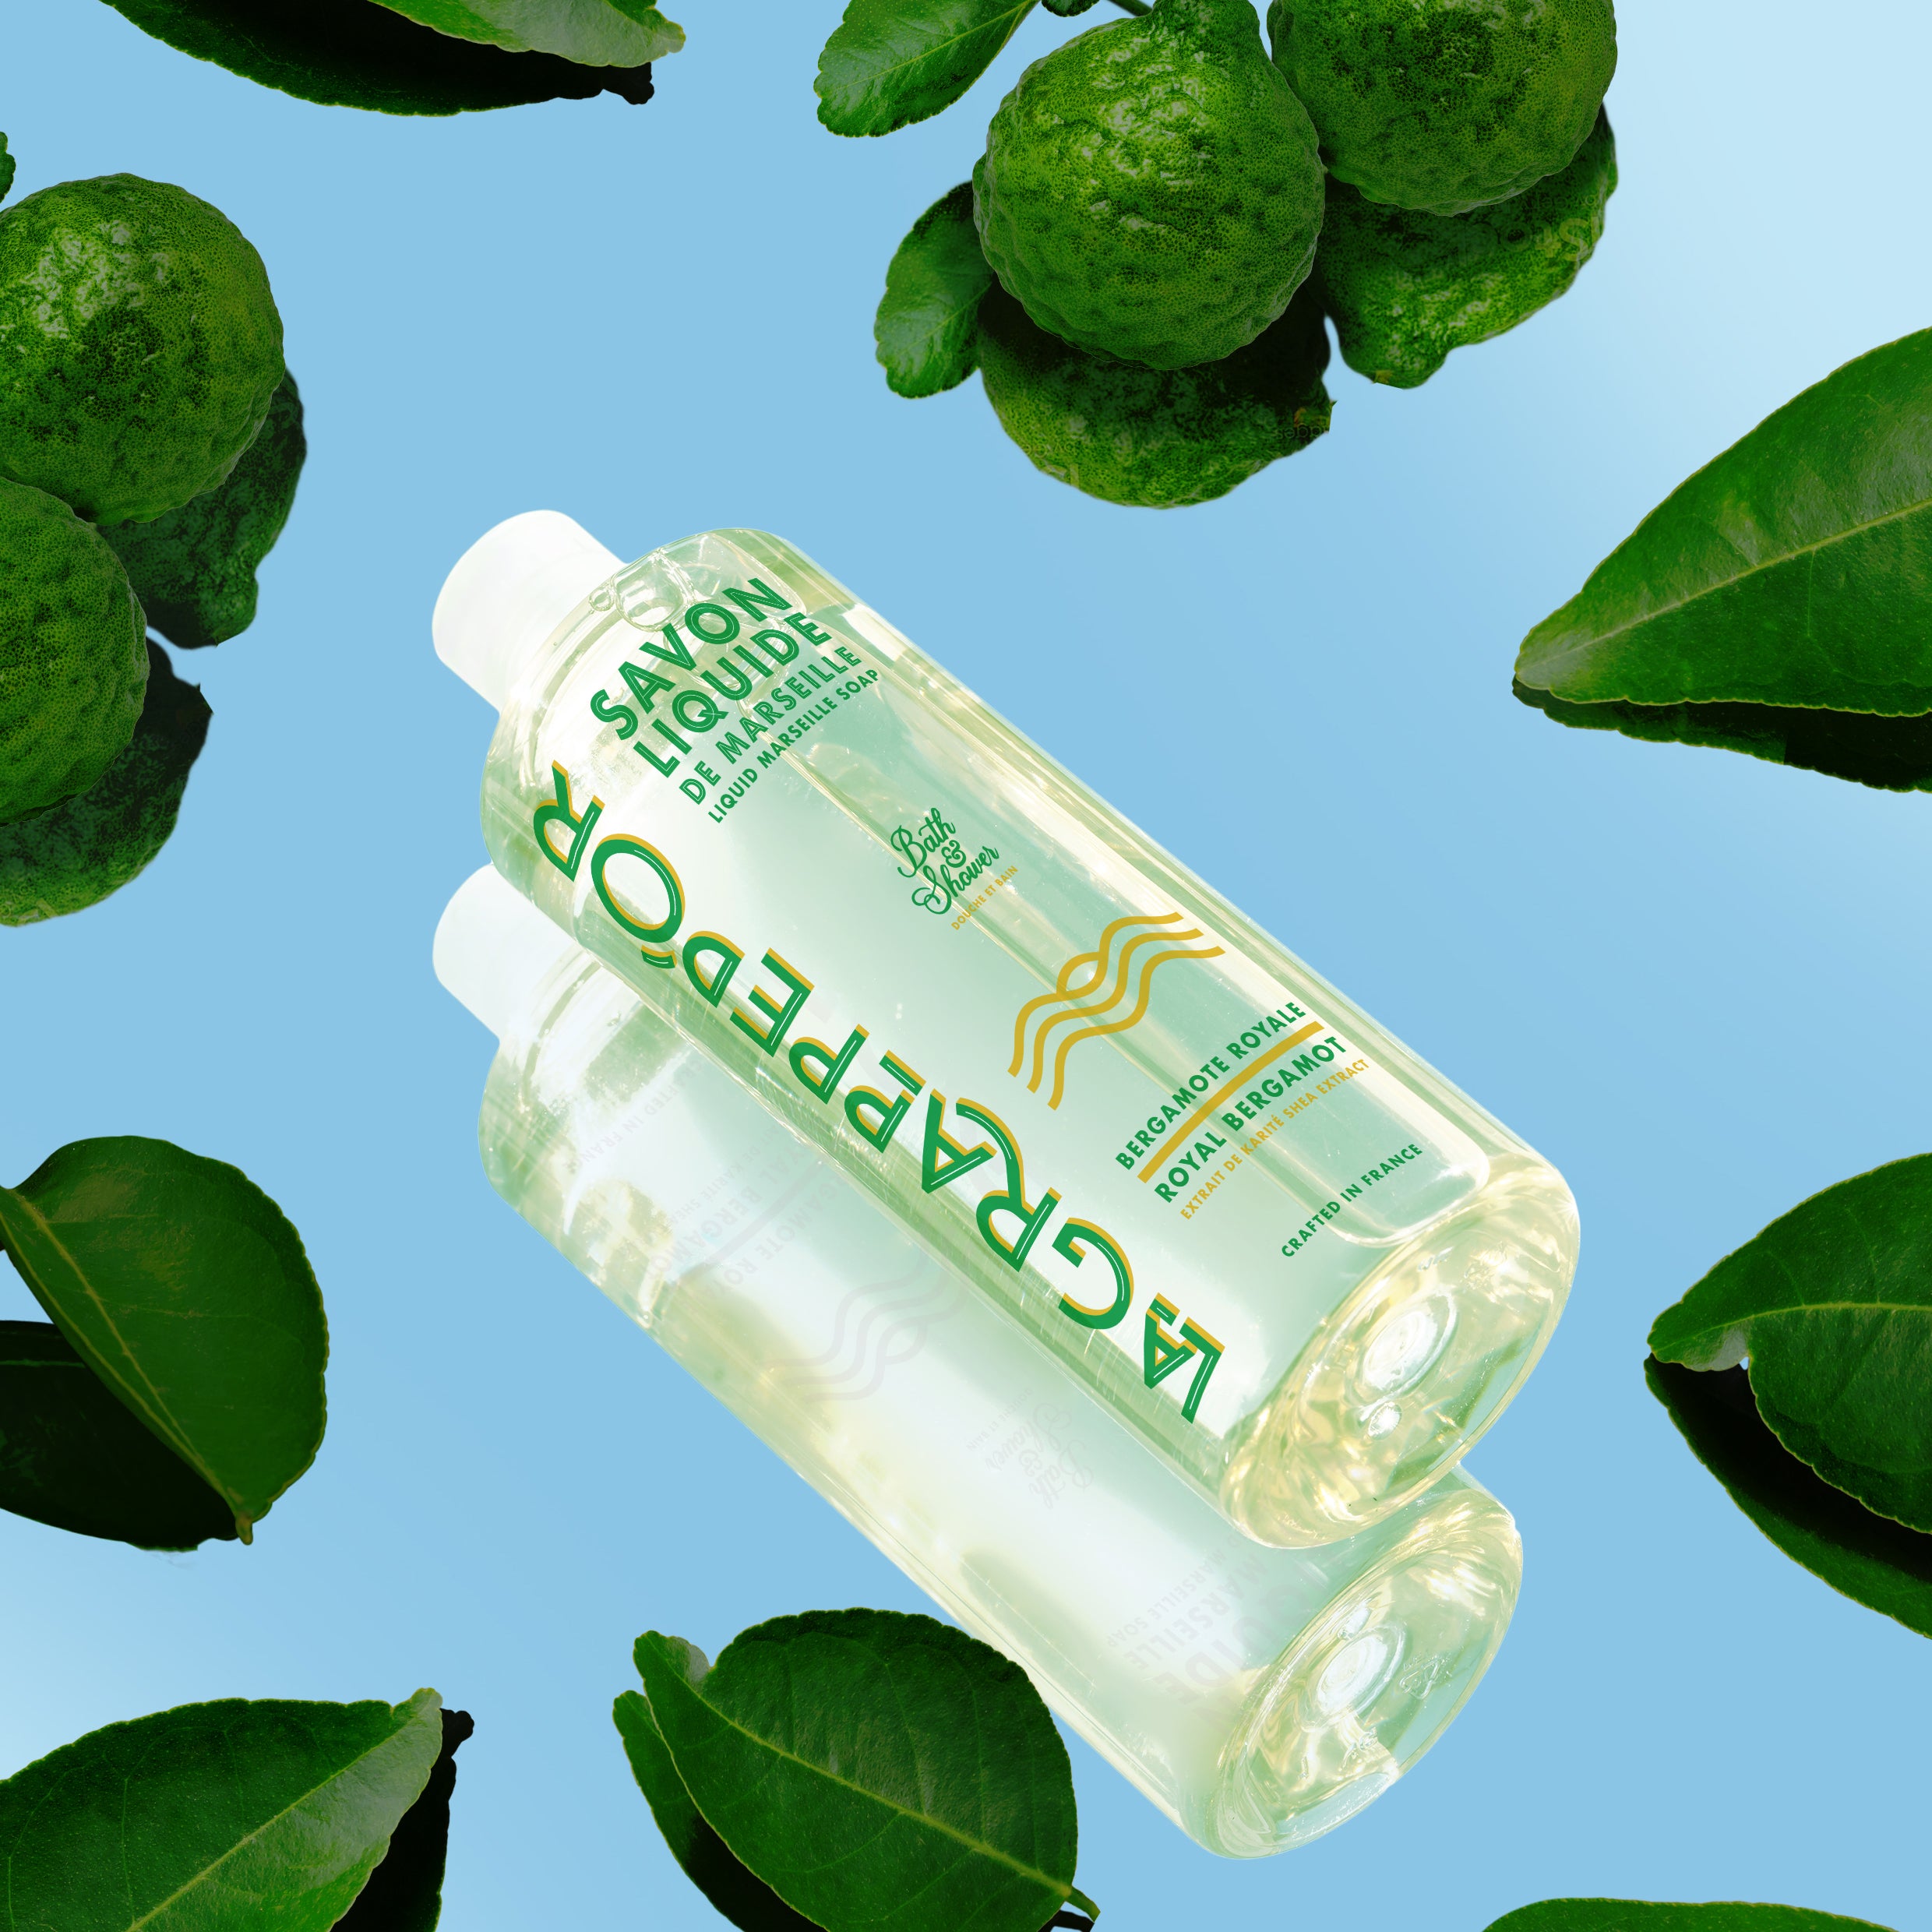 This rich liquid body soap gently cleanses and refreshes the skin.